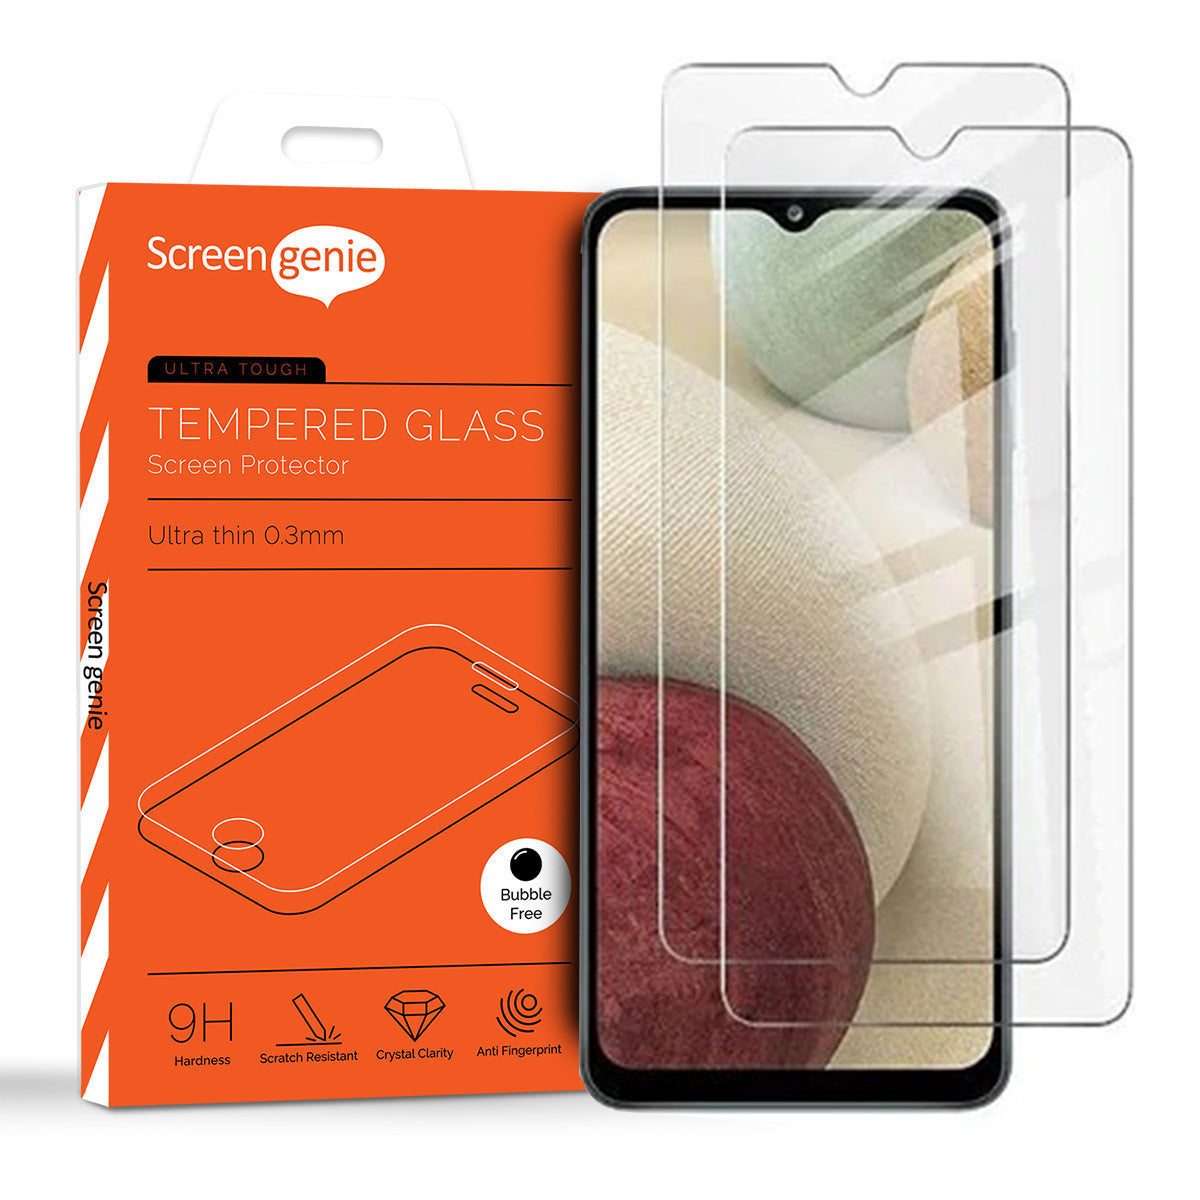 Samsung Galaxy A23 Cases, Covers &amp; Accessories